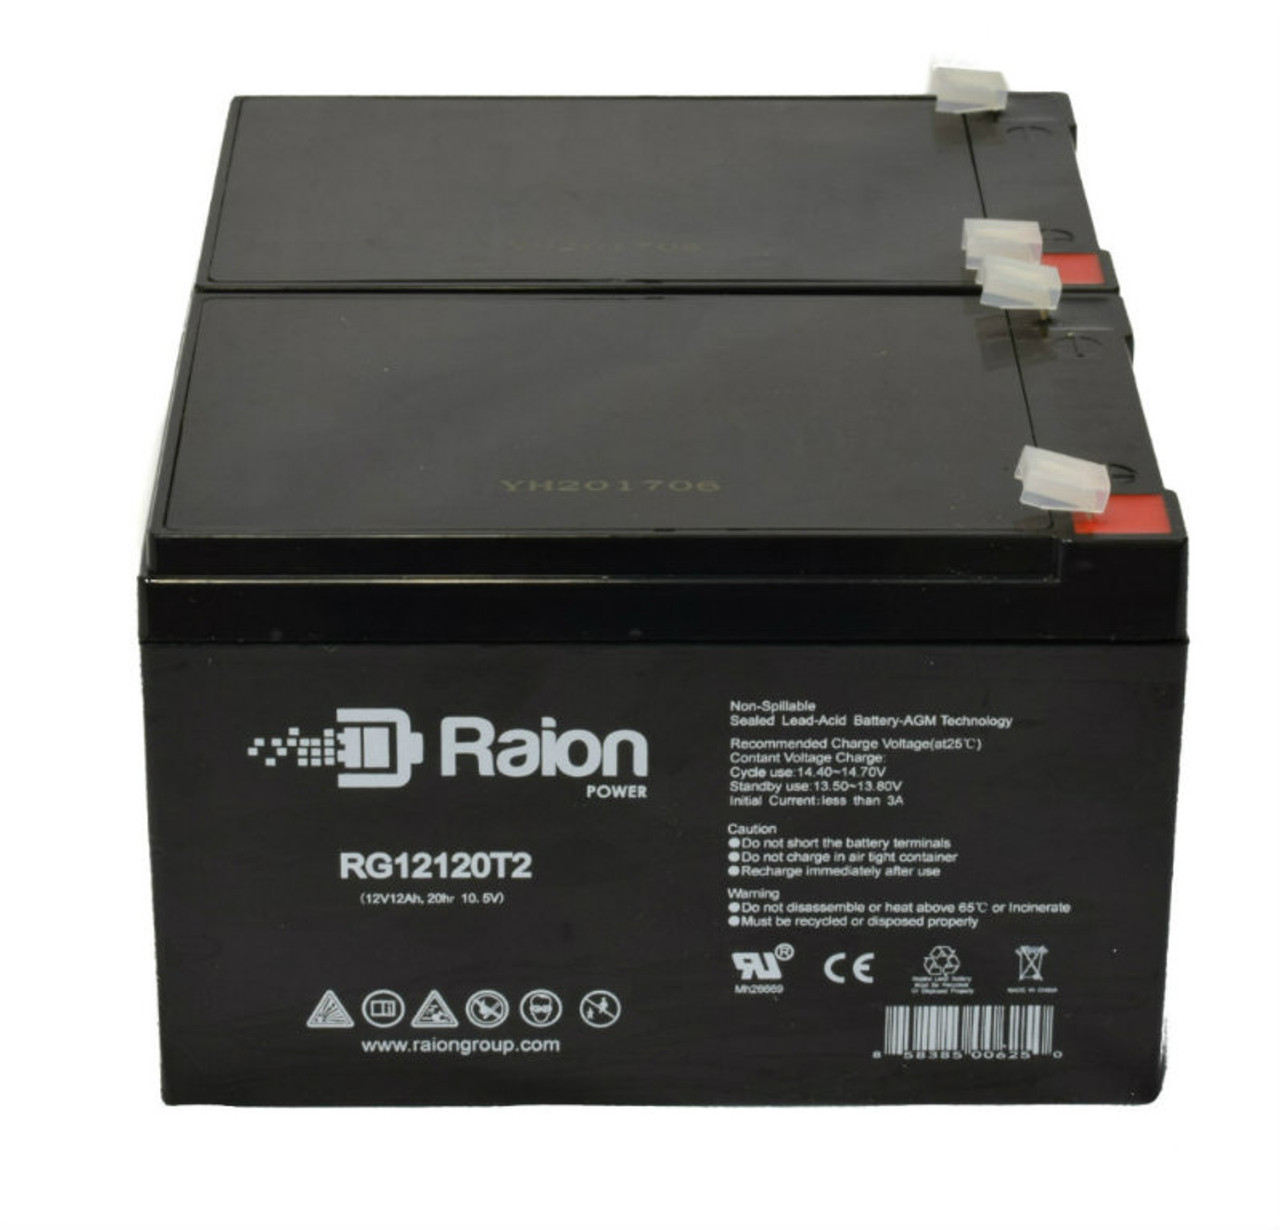 Raion Power 12V 12Ah Replacement Alarm Security System Battery for Altronix AL600ULACMCB - 2 Pack